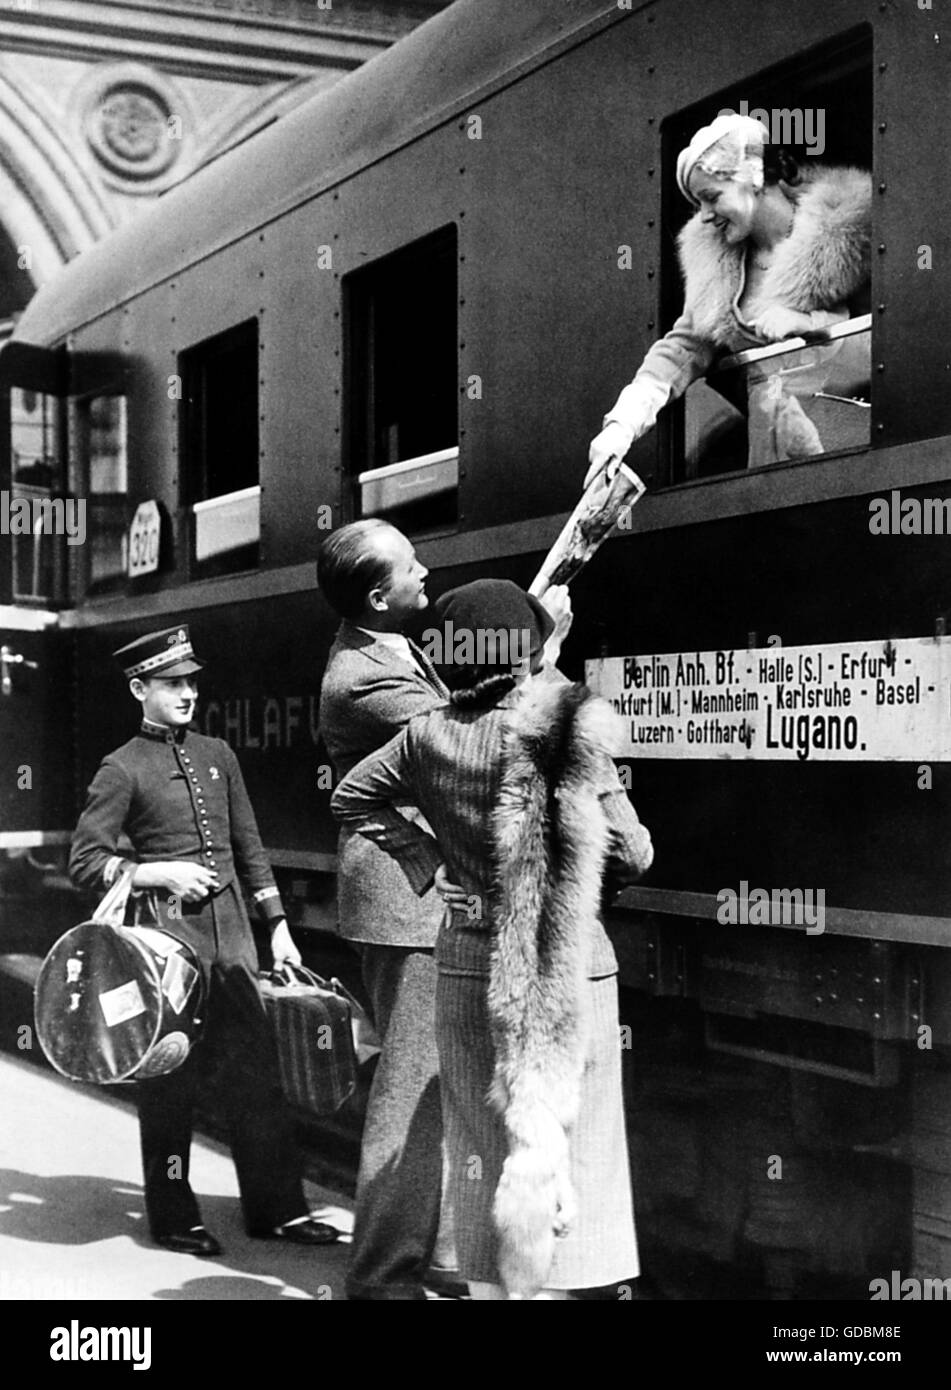 transport / transportation, railway, station, farewell on platform, Anhalter Bahnhof, Berlin, Germany, 1934, Additional-Rights-Clearences-Not Available Stock Photo